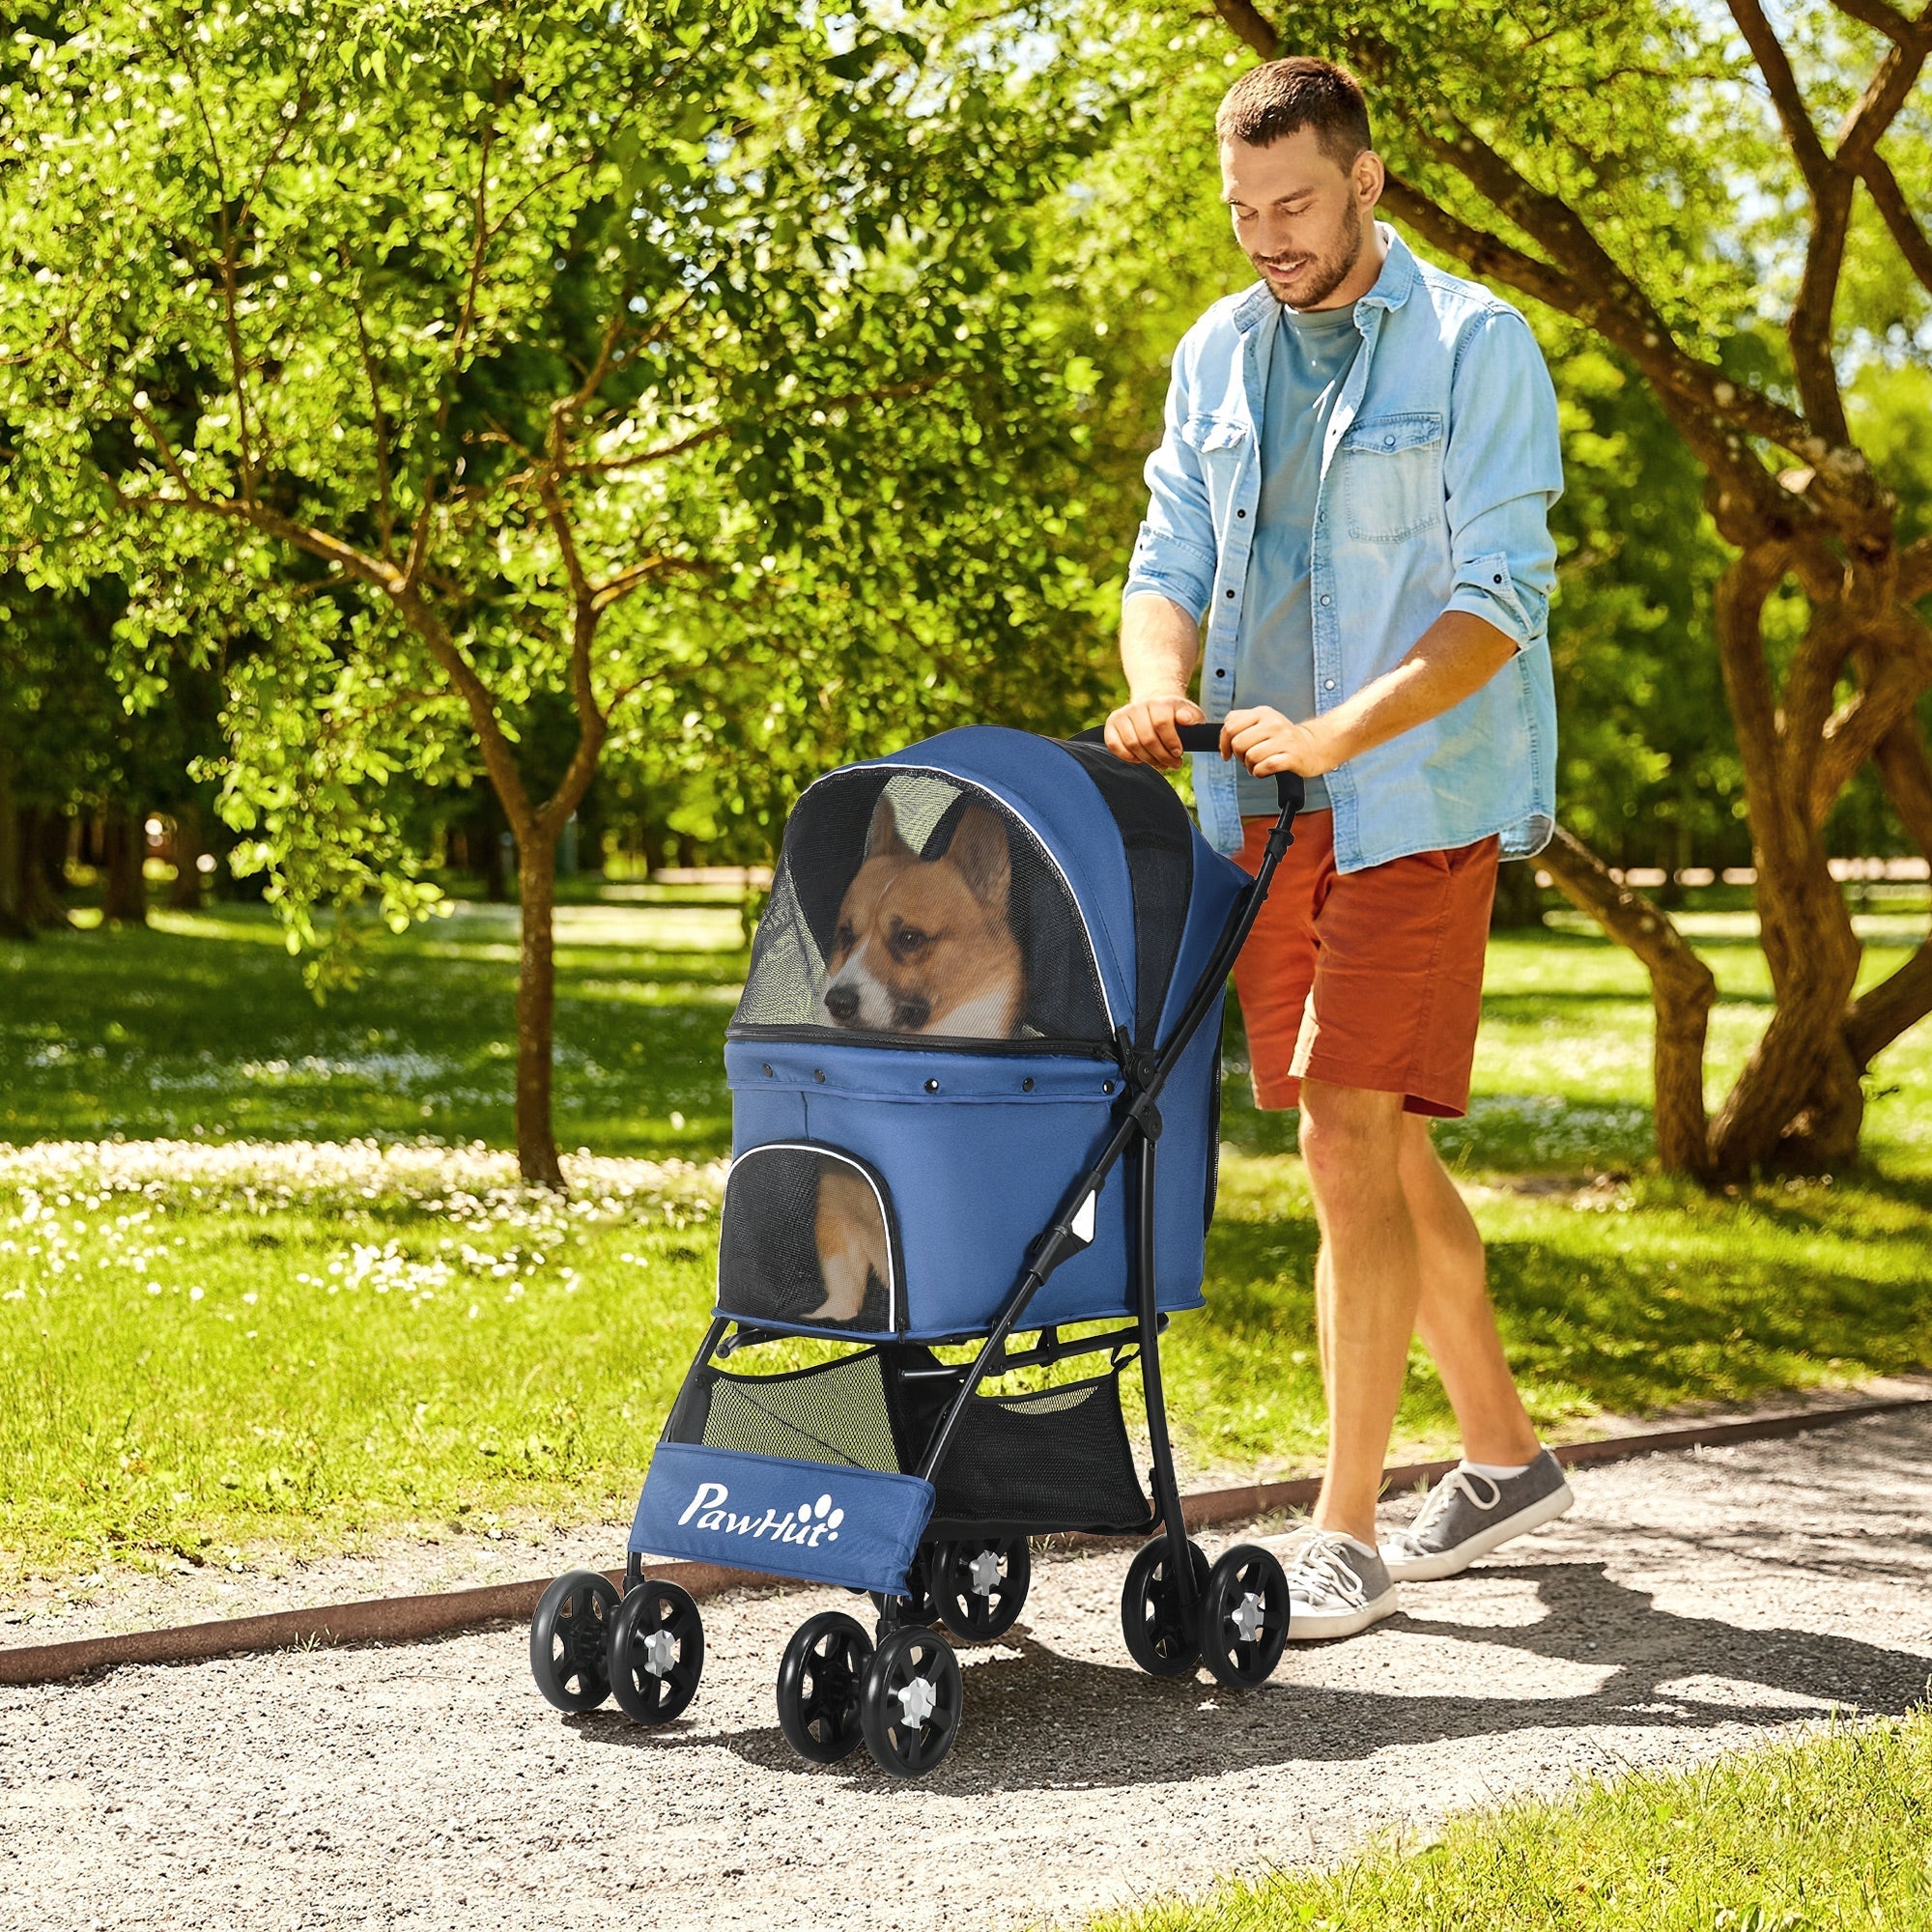 Compact Folding Pet Stroller - Large Carriage & Brakes for Small Sized Dogs, PawHut, Dark Blue